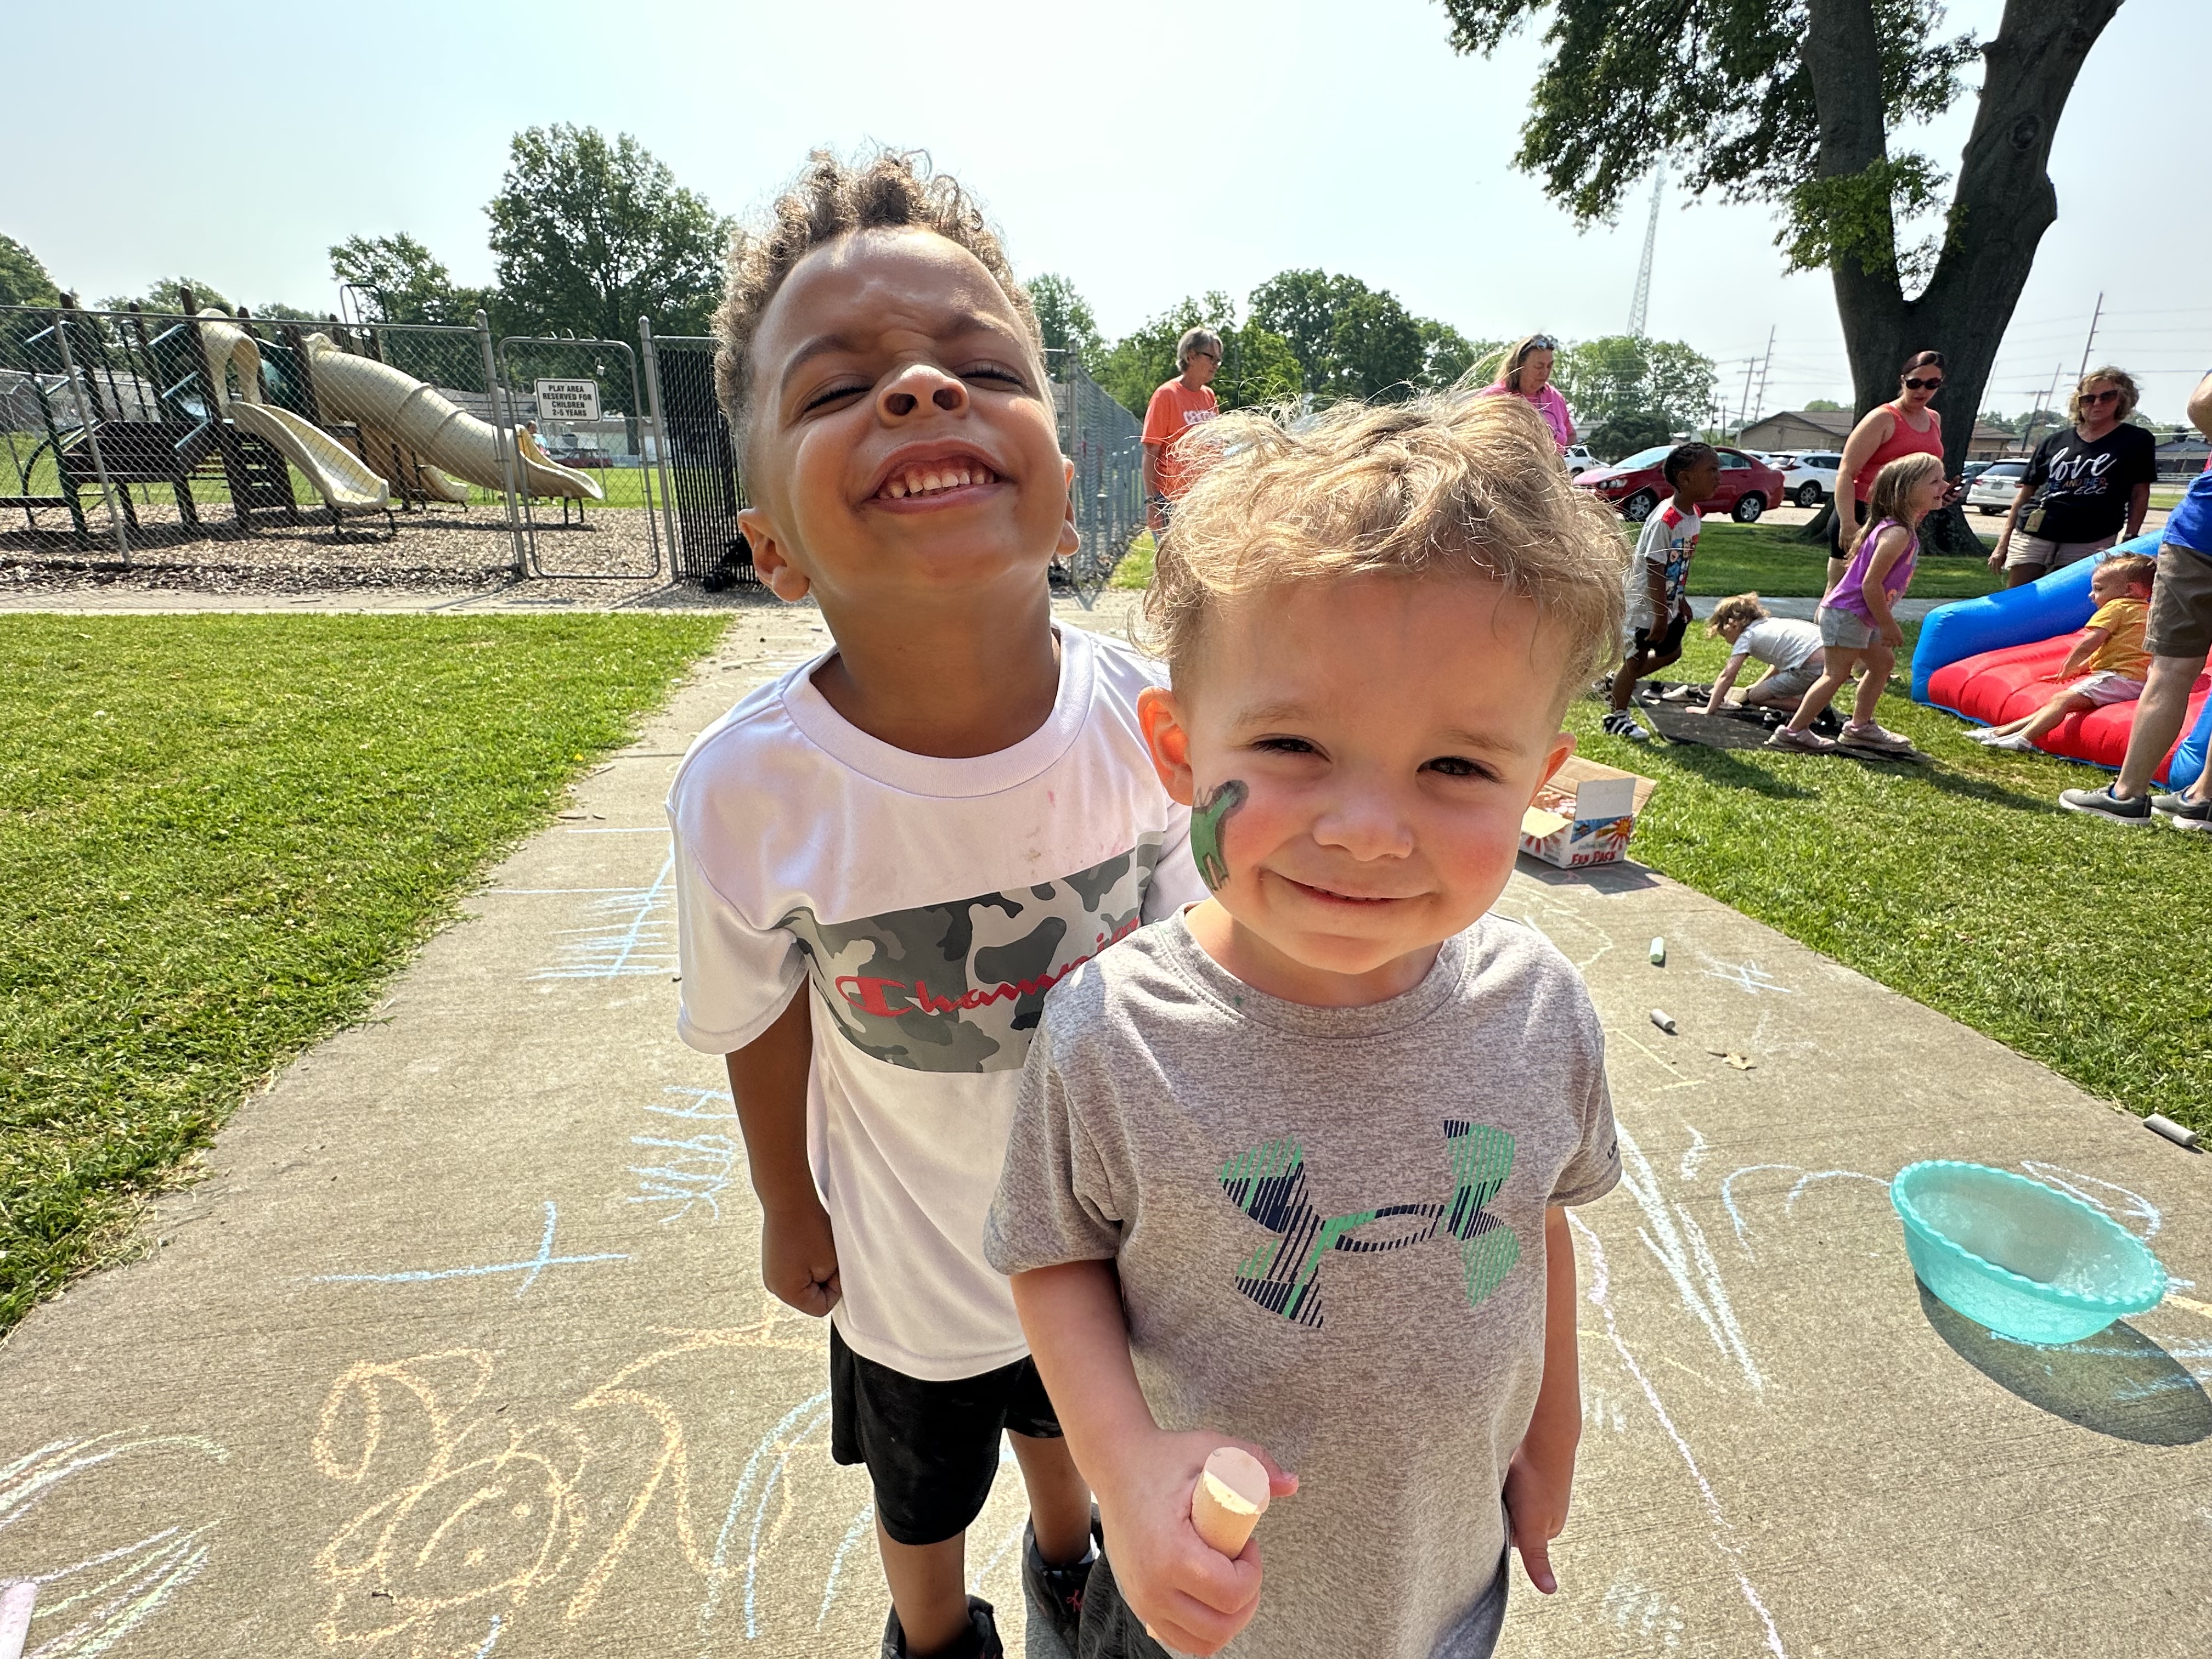 Two young children are smiling for the camera on the playground